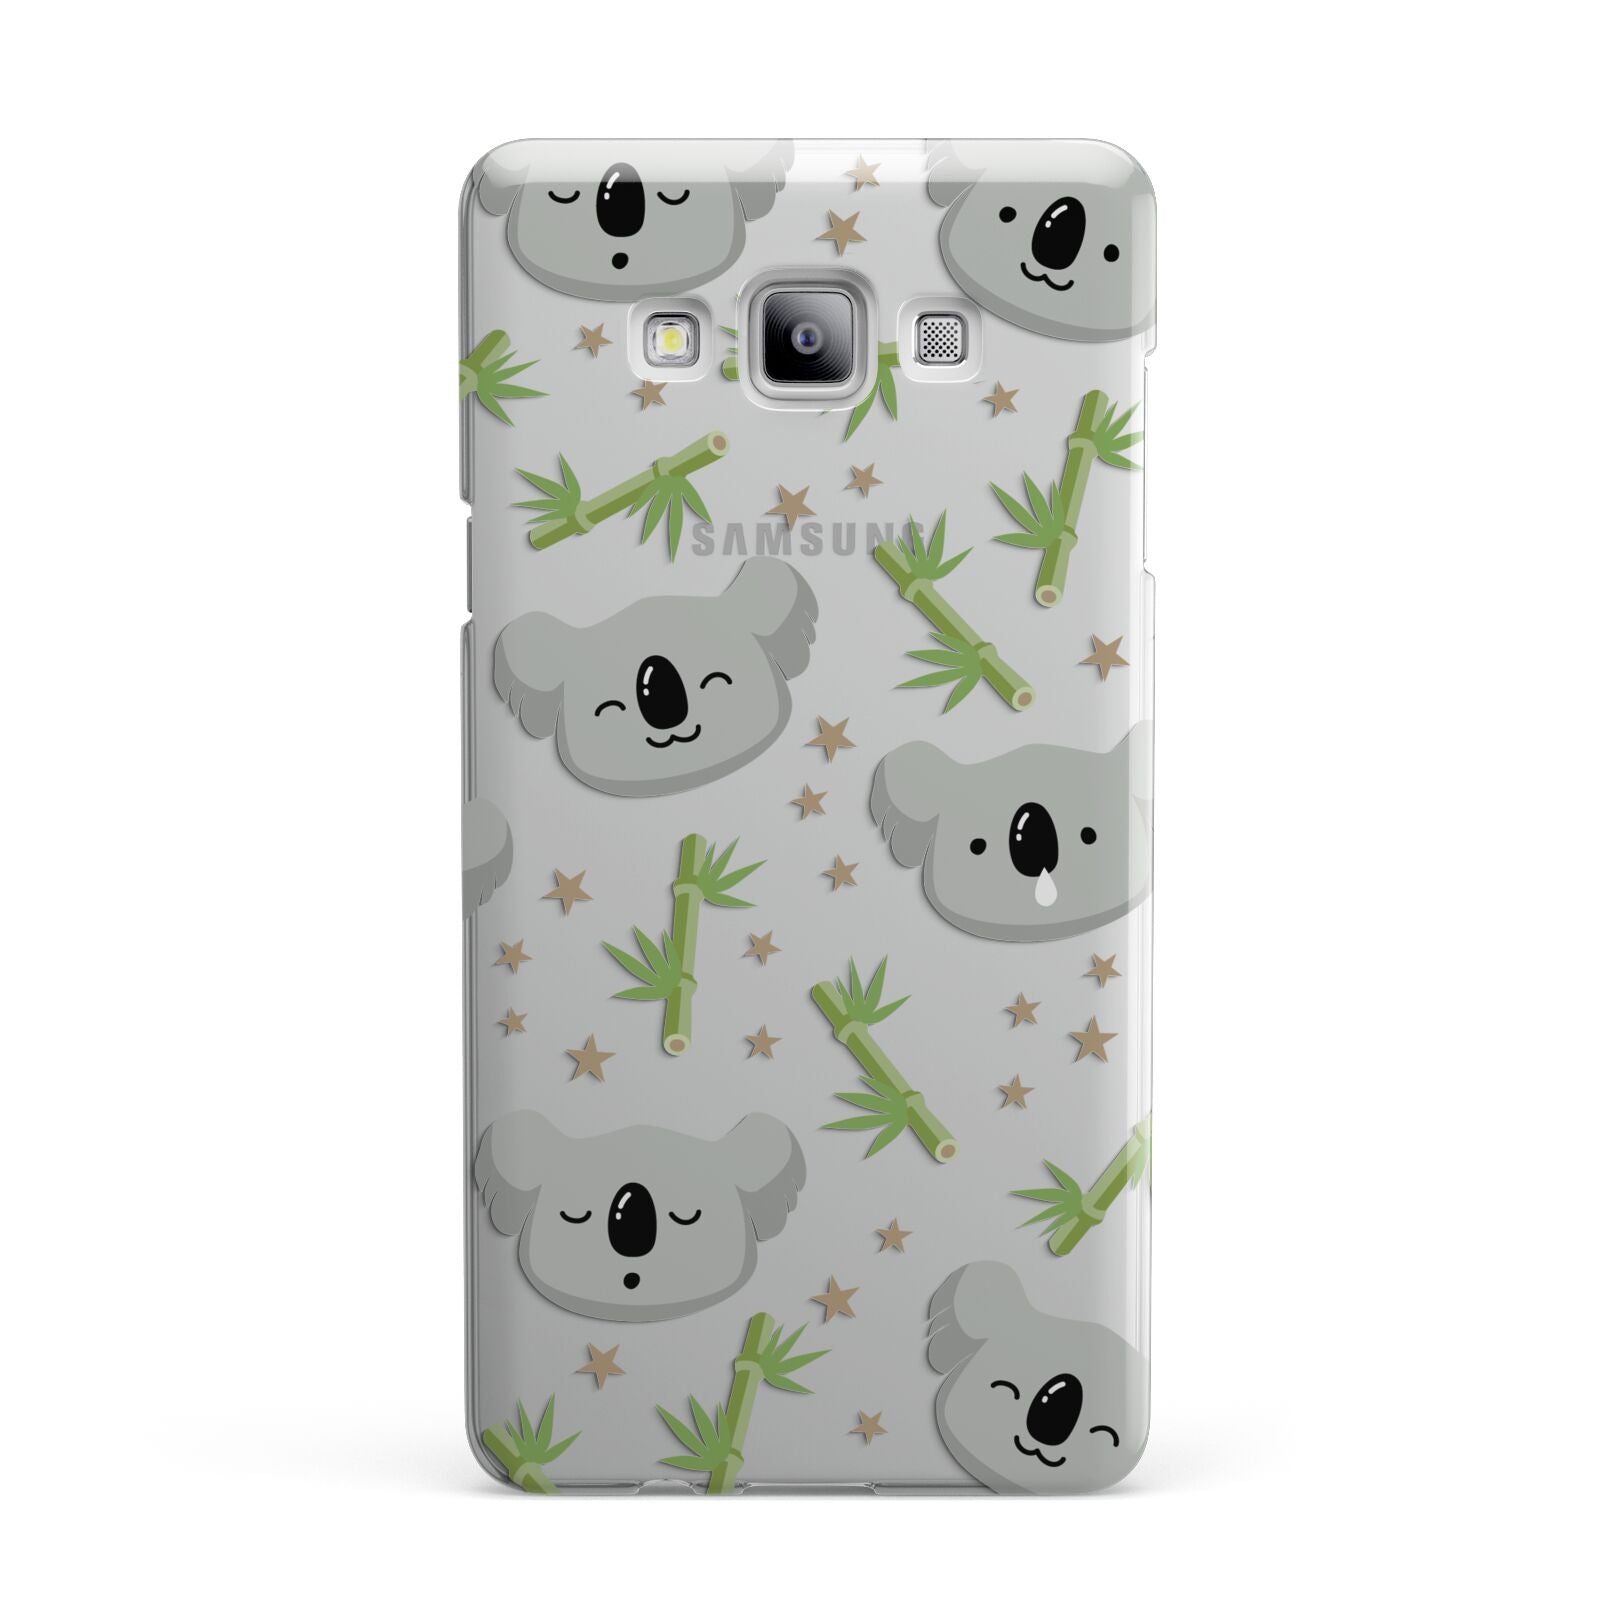 Koala Faces with Transparent Background Samsung Galaxy A7 2015 Case